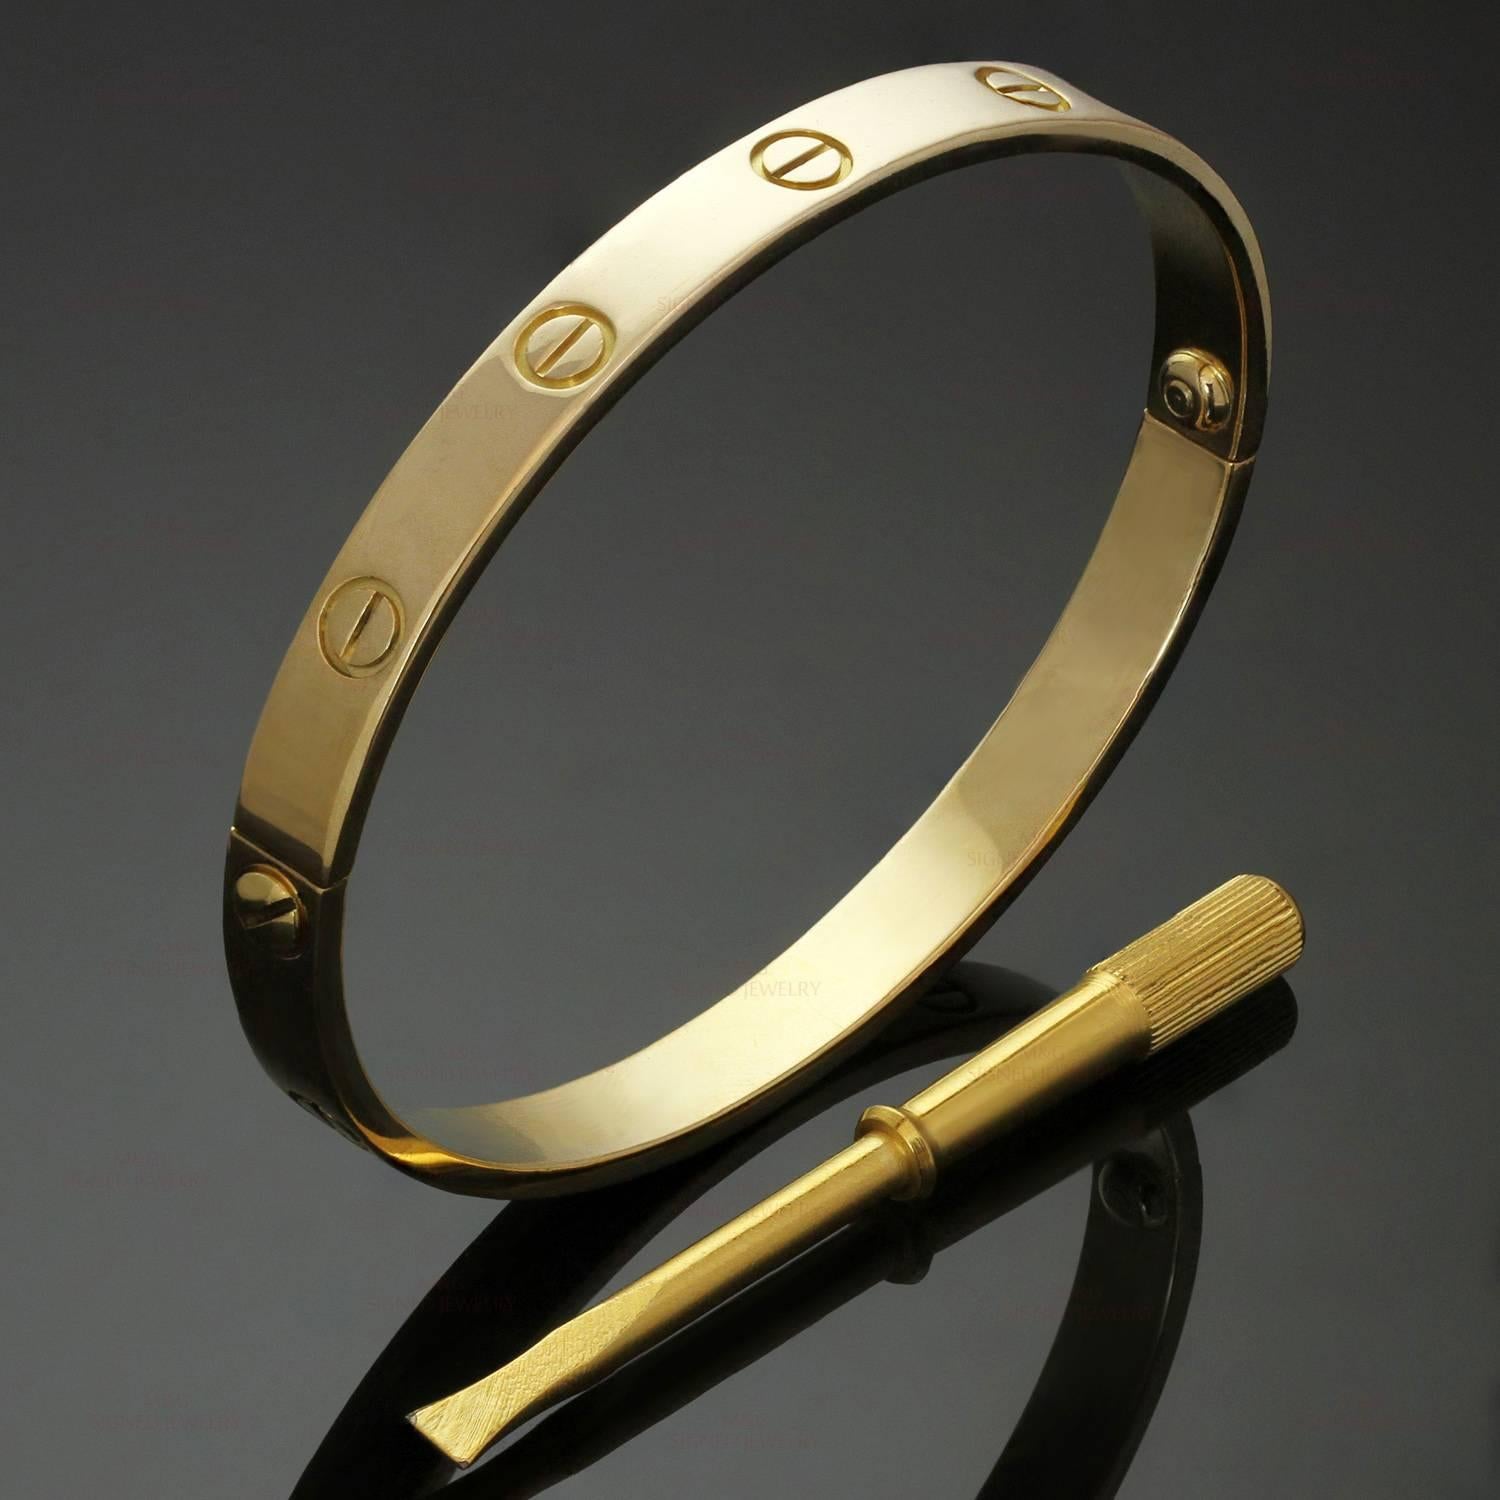 This iconic and timeless bracelet from Cartier's Love collection is finely crafted in 18k yellow gold and completed with the original Cartier screwdriver. This bangle is a size 18. Made in France circa 2000s. Comes with Cartier pouch and Carrier